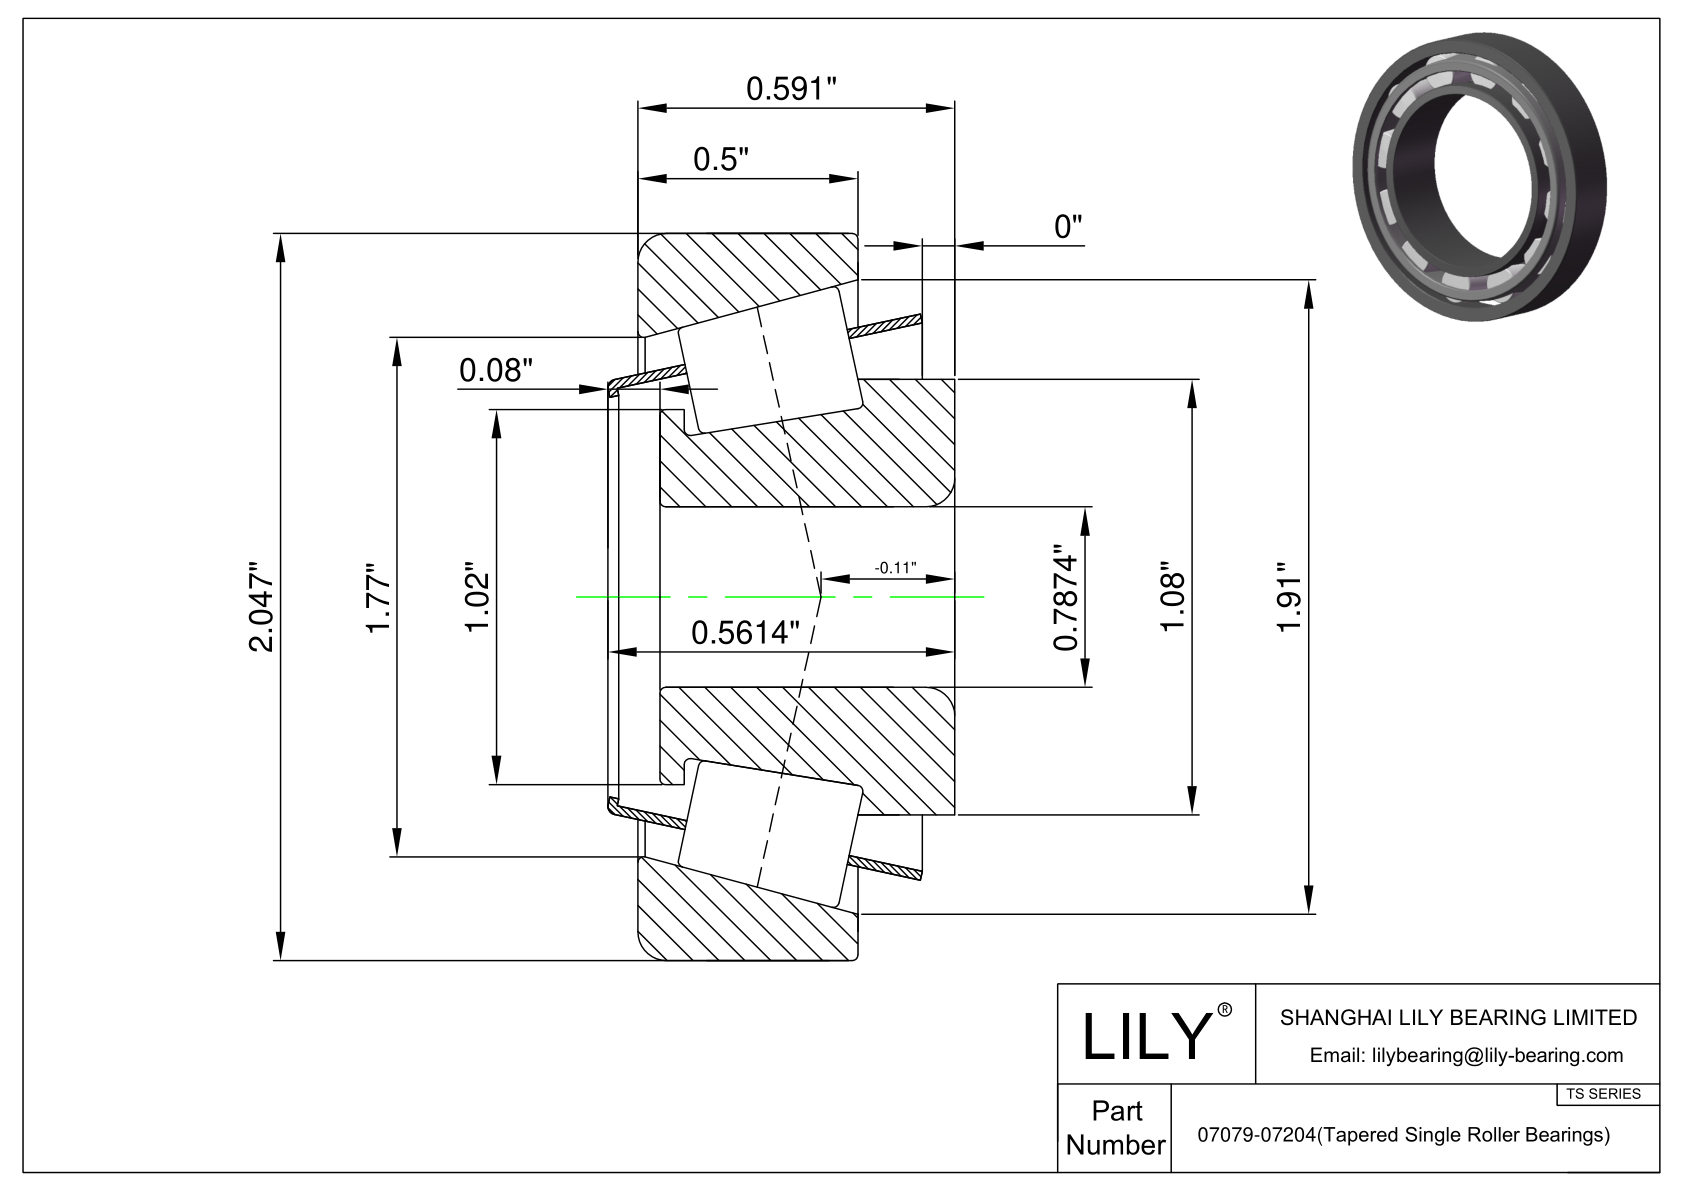 07079-07204 TS (Tapered Single Roller Bearings) (Imperial) cad drawing